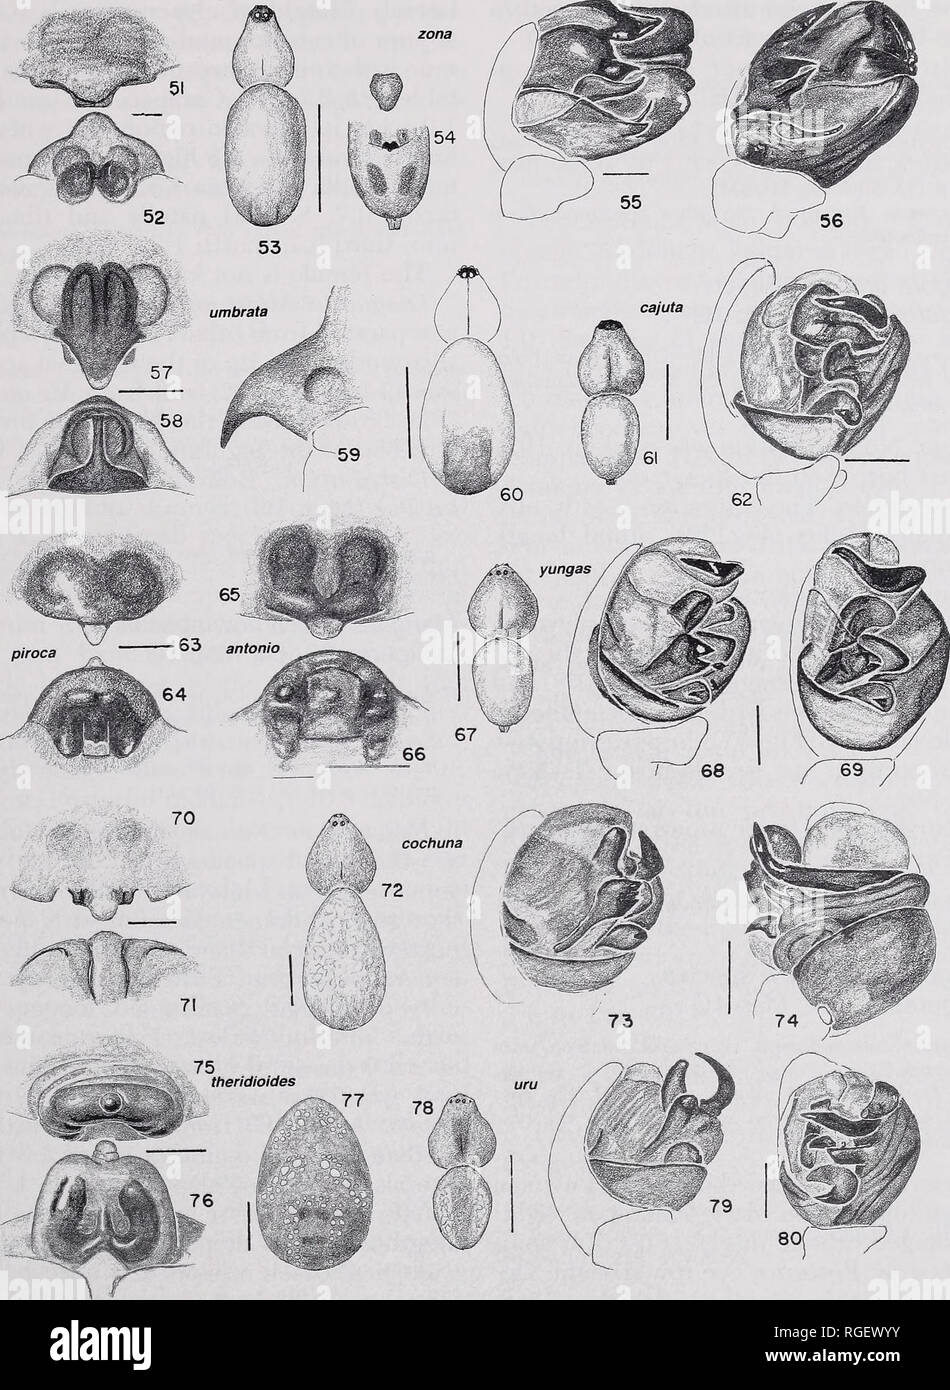 . Bulletin of the Museum of Comparative Zoology at Harvard College. Zoology; Zoology. South American Mangora • Levi 35. Figures 70-74. M. cochuna new species, 70-72, female. 70, 71, epigynum. 70, ventral; 71, posterior. 72, carapace, abdomen. 73, 74, male palpus. 73, mesal; 74, ventral. Figures 75-77. M. theridioides Mello-Leitao, female. 75, 76, epigynum. 75, ventral; 76, posterior. 77, abdomen, dorsal. Figures 78-80. M. uru new species, male. 78, carapace, abdomen. 79, 80, male palpus. 79, mesal; 80, ventral. Scale lines: 1.0 mm; genitalia, 0.1 mm.. Please note that these images are extracte Stock Photo